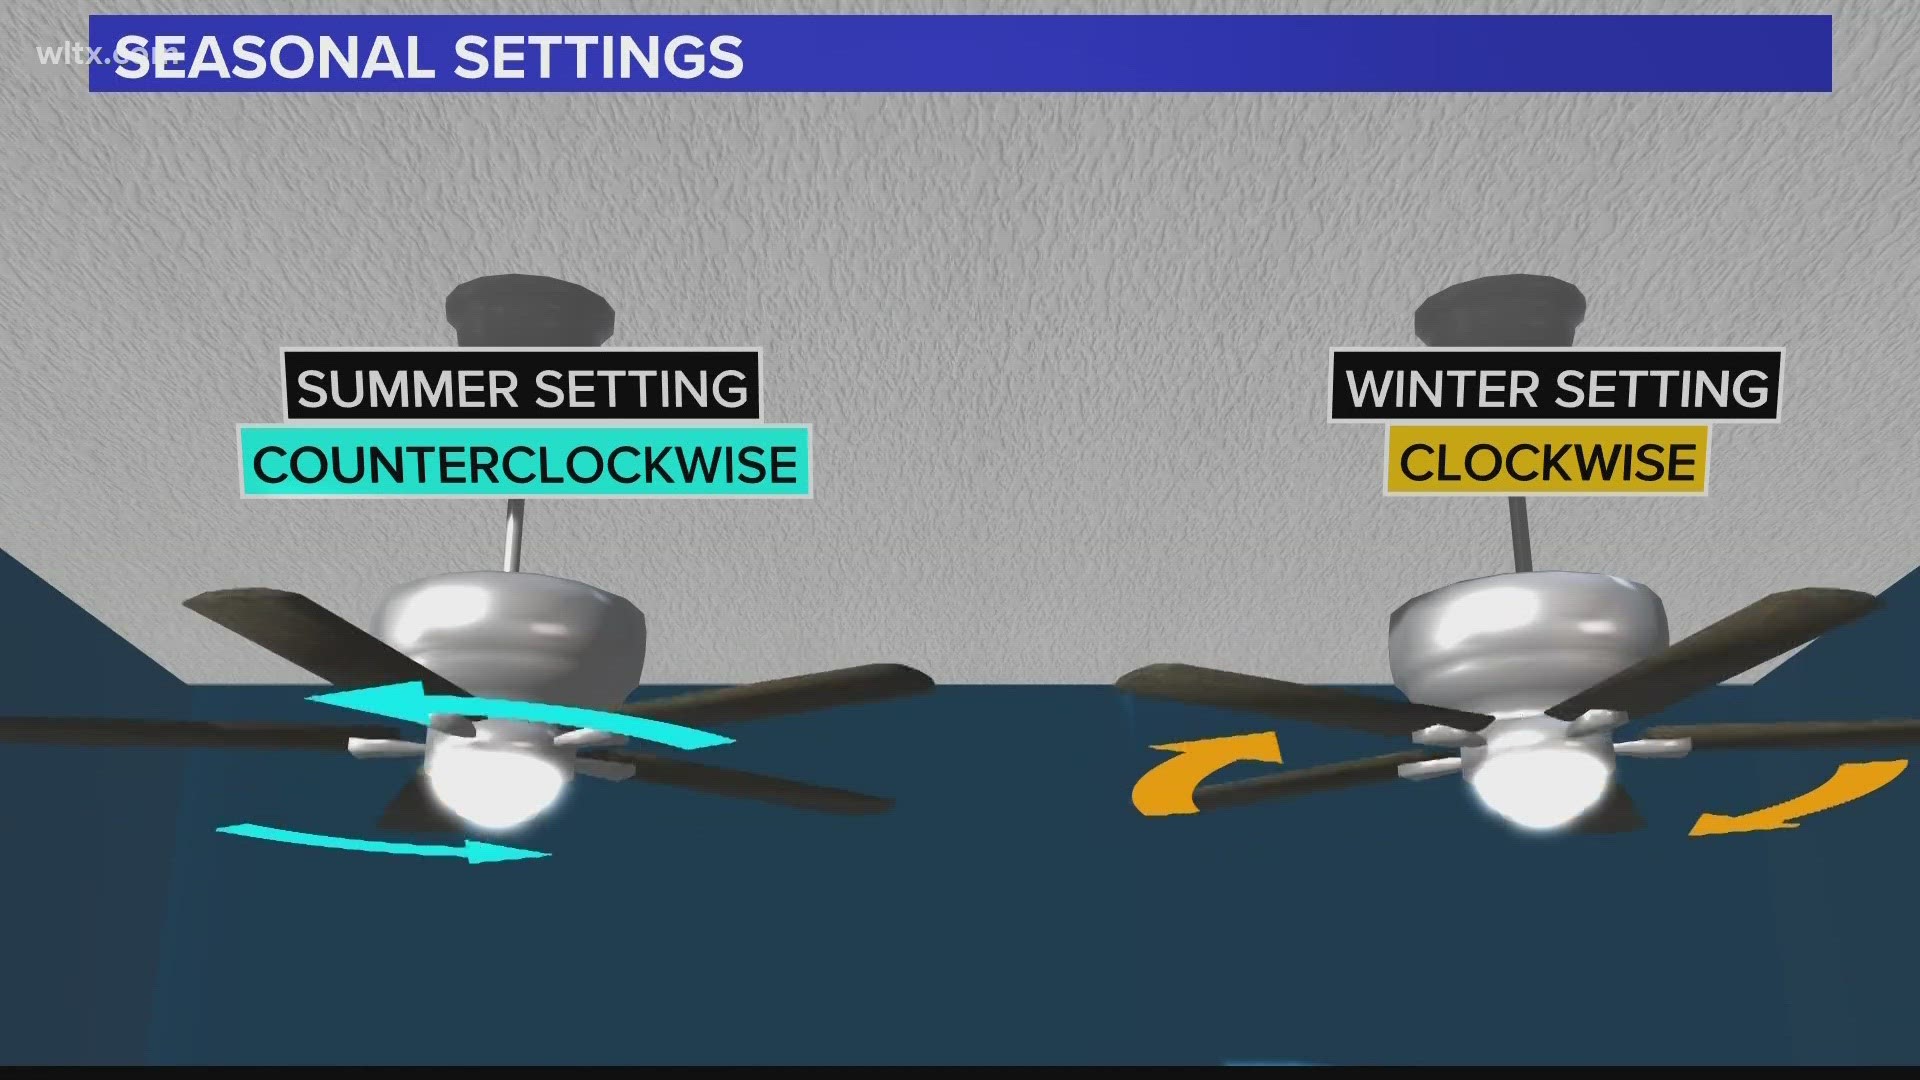 Here S When And Why You Should Change Your Ceiling Fan Direction Wltx Com